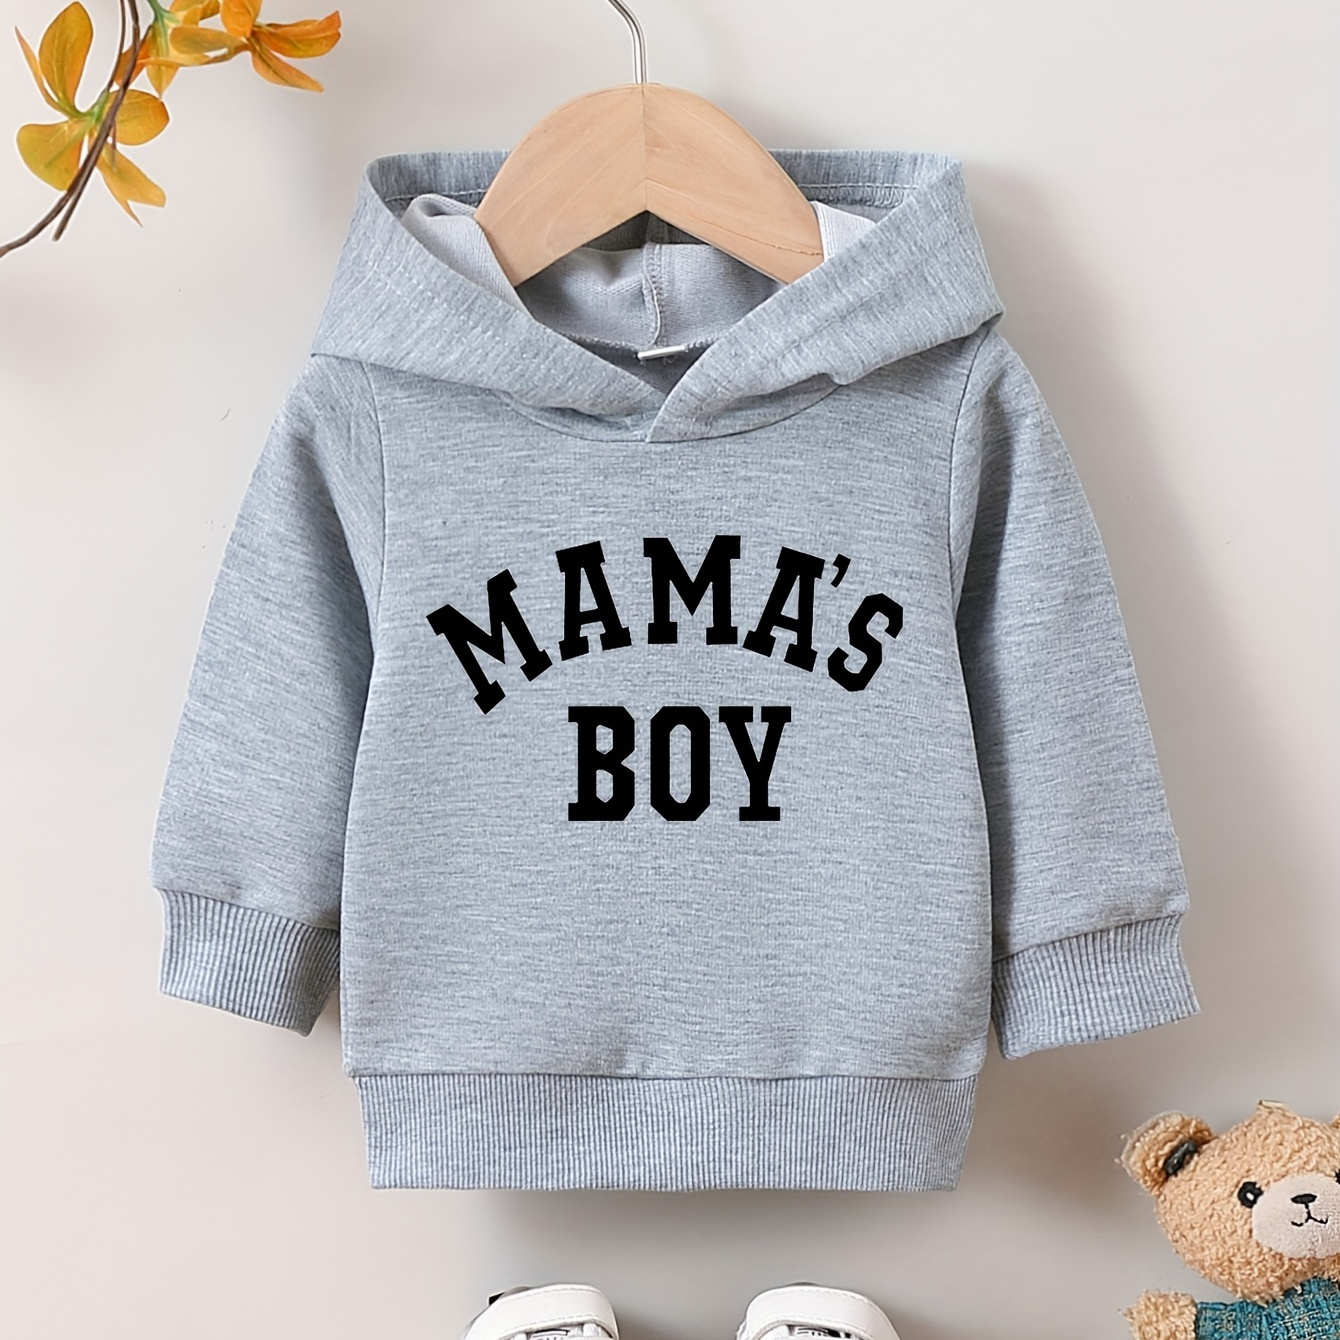 

Mama's Boy Print Baby Boy's Long Sleeve Hoodies, Casual Pullover Hooded Sweatshirts, Baby's Clothes